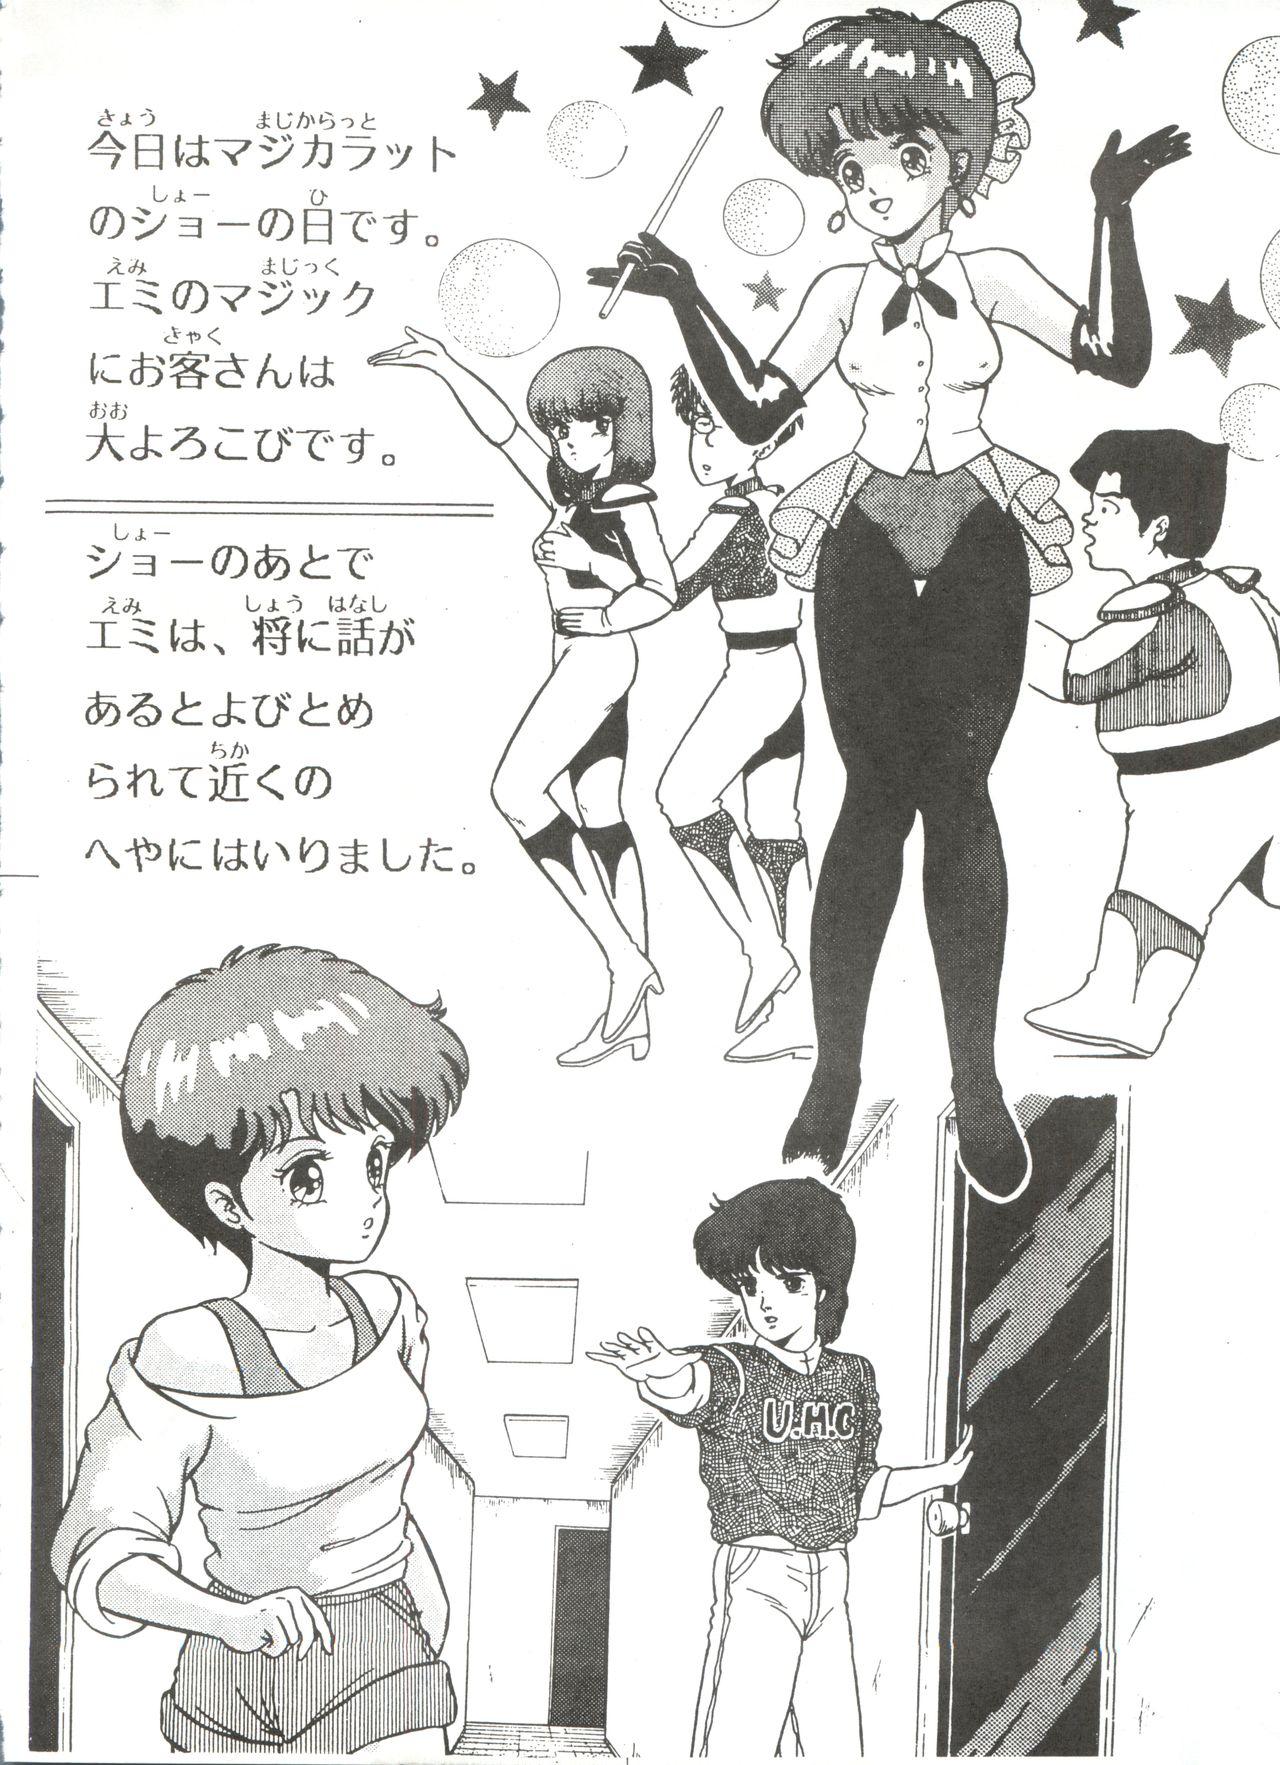 Watersports Look Out 3R - Maison ikkoku Magical emi Gundam zz The super dimension fortress macross Fucking Sex - Page 6